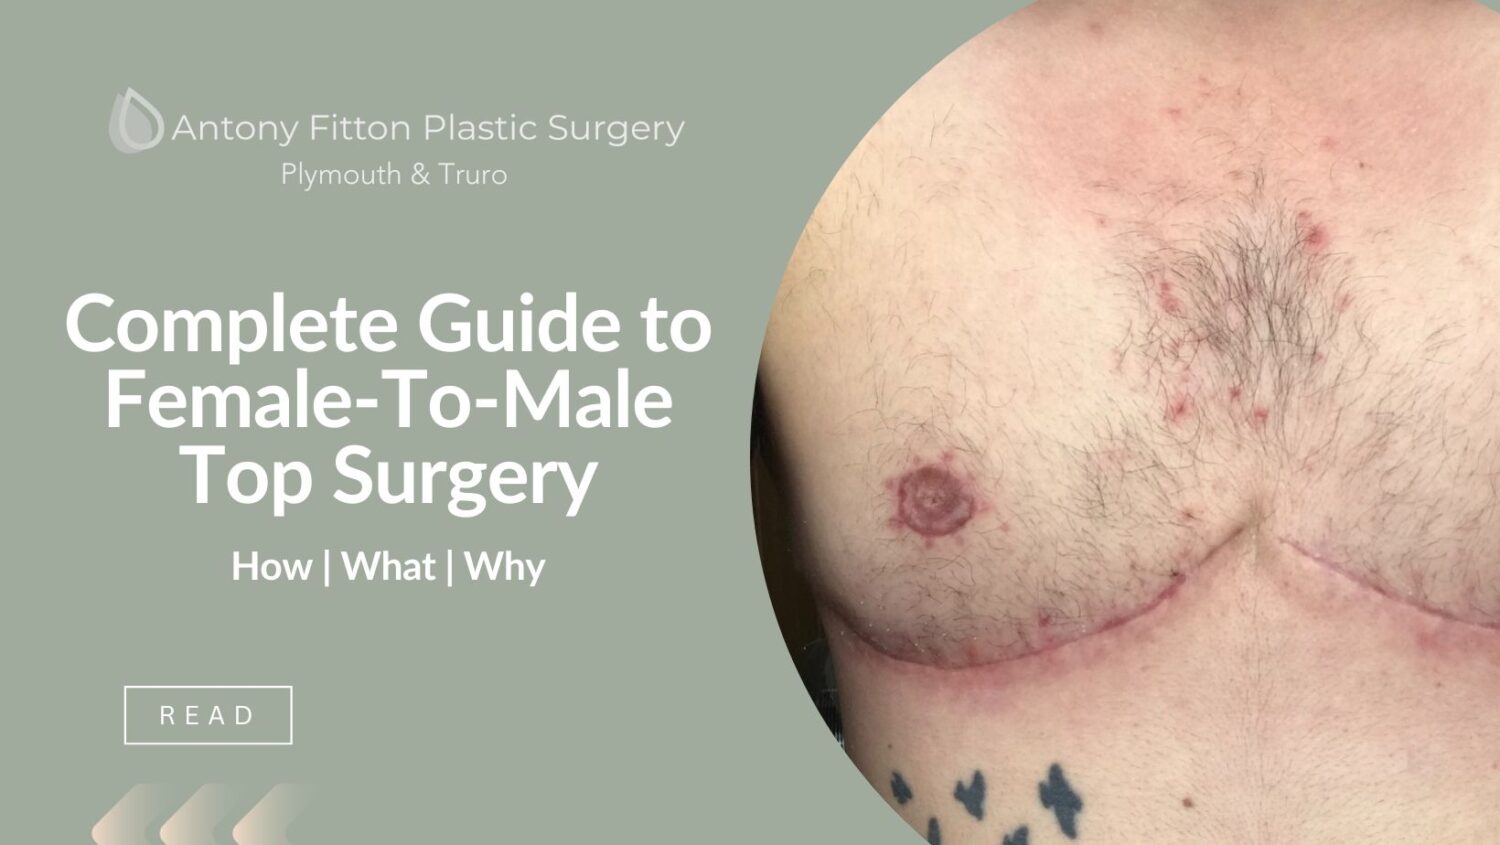 Complete Guide to Female-To-Male Top Surgery | Antony Fitton Plastic Surgery | Plymouth and Truro